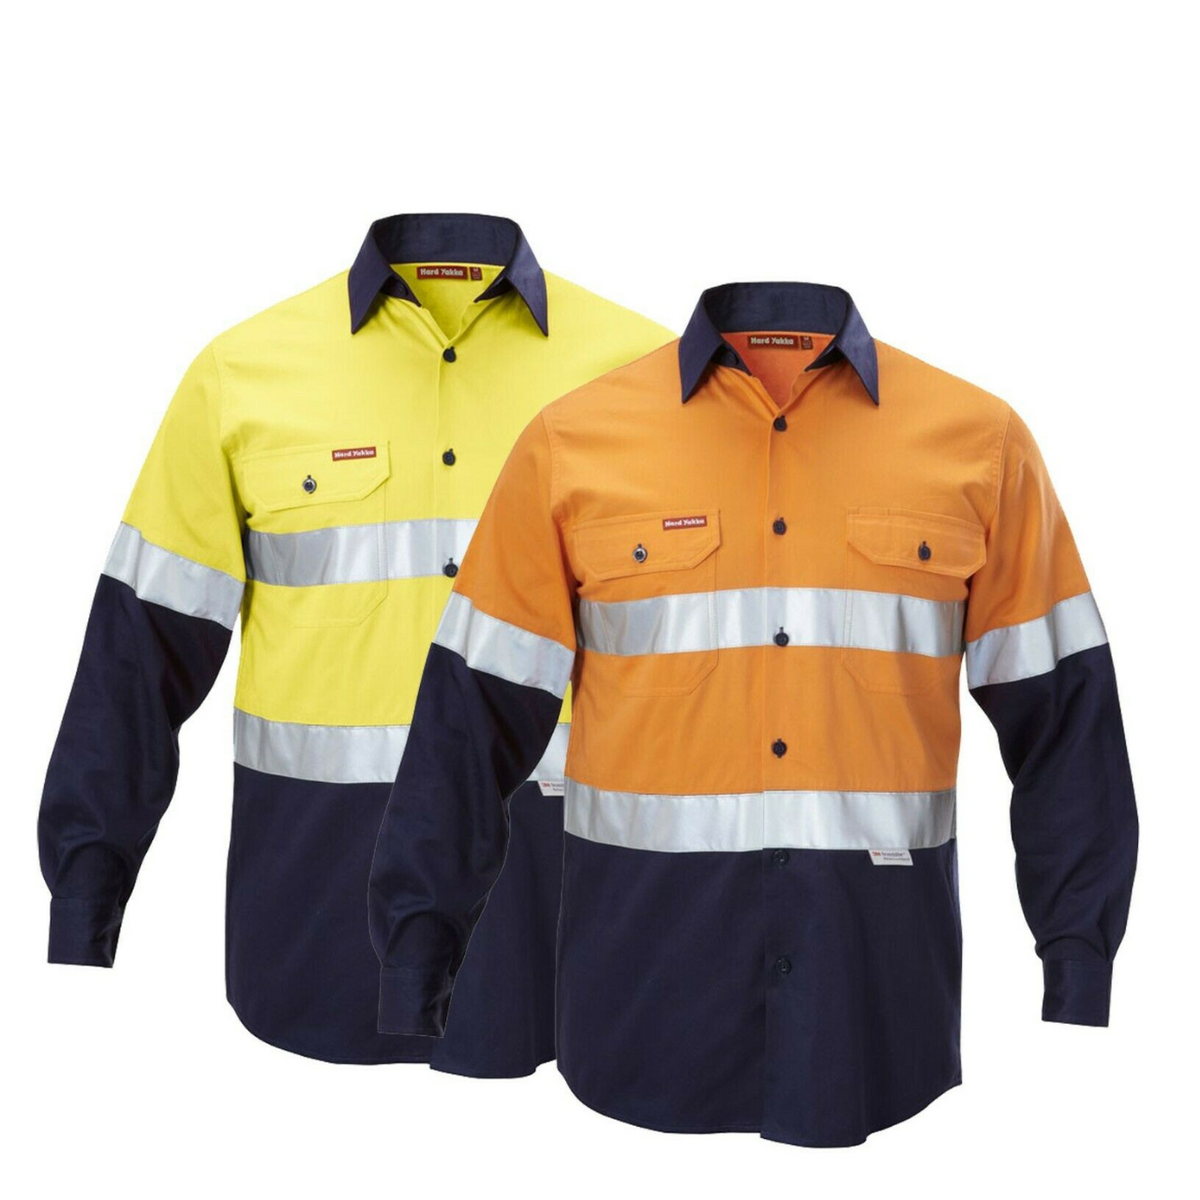 Hard Yakka Work Shirt Hi-Vis Taped Safety Long Sleeve Cotton Drill Y07990-Collins Clothing Co